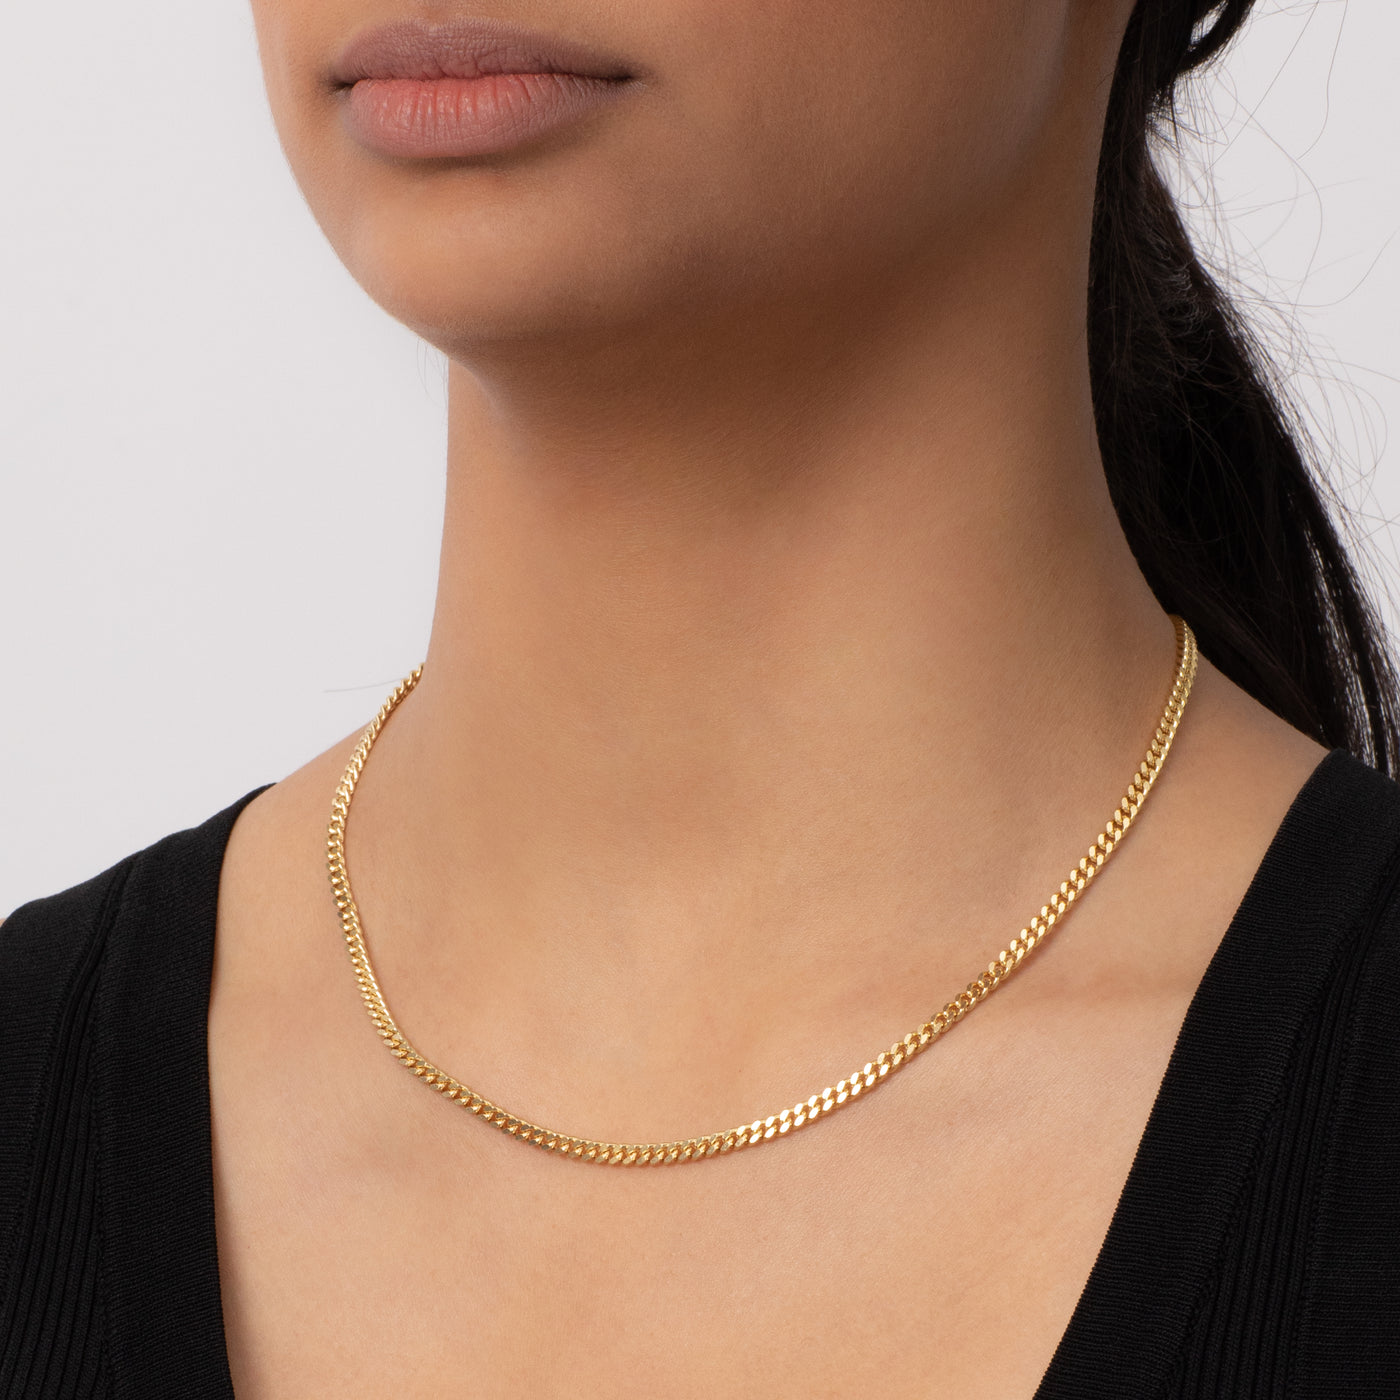 14K SOLID GOLD CUBAN LINK CHAIN